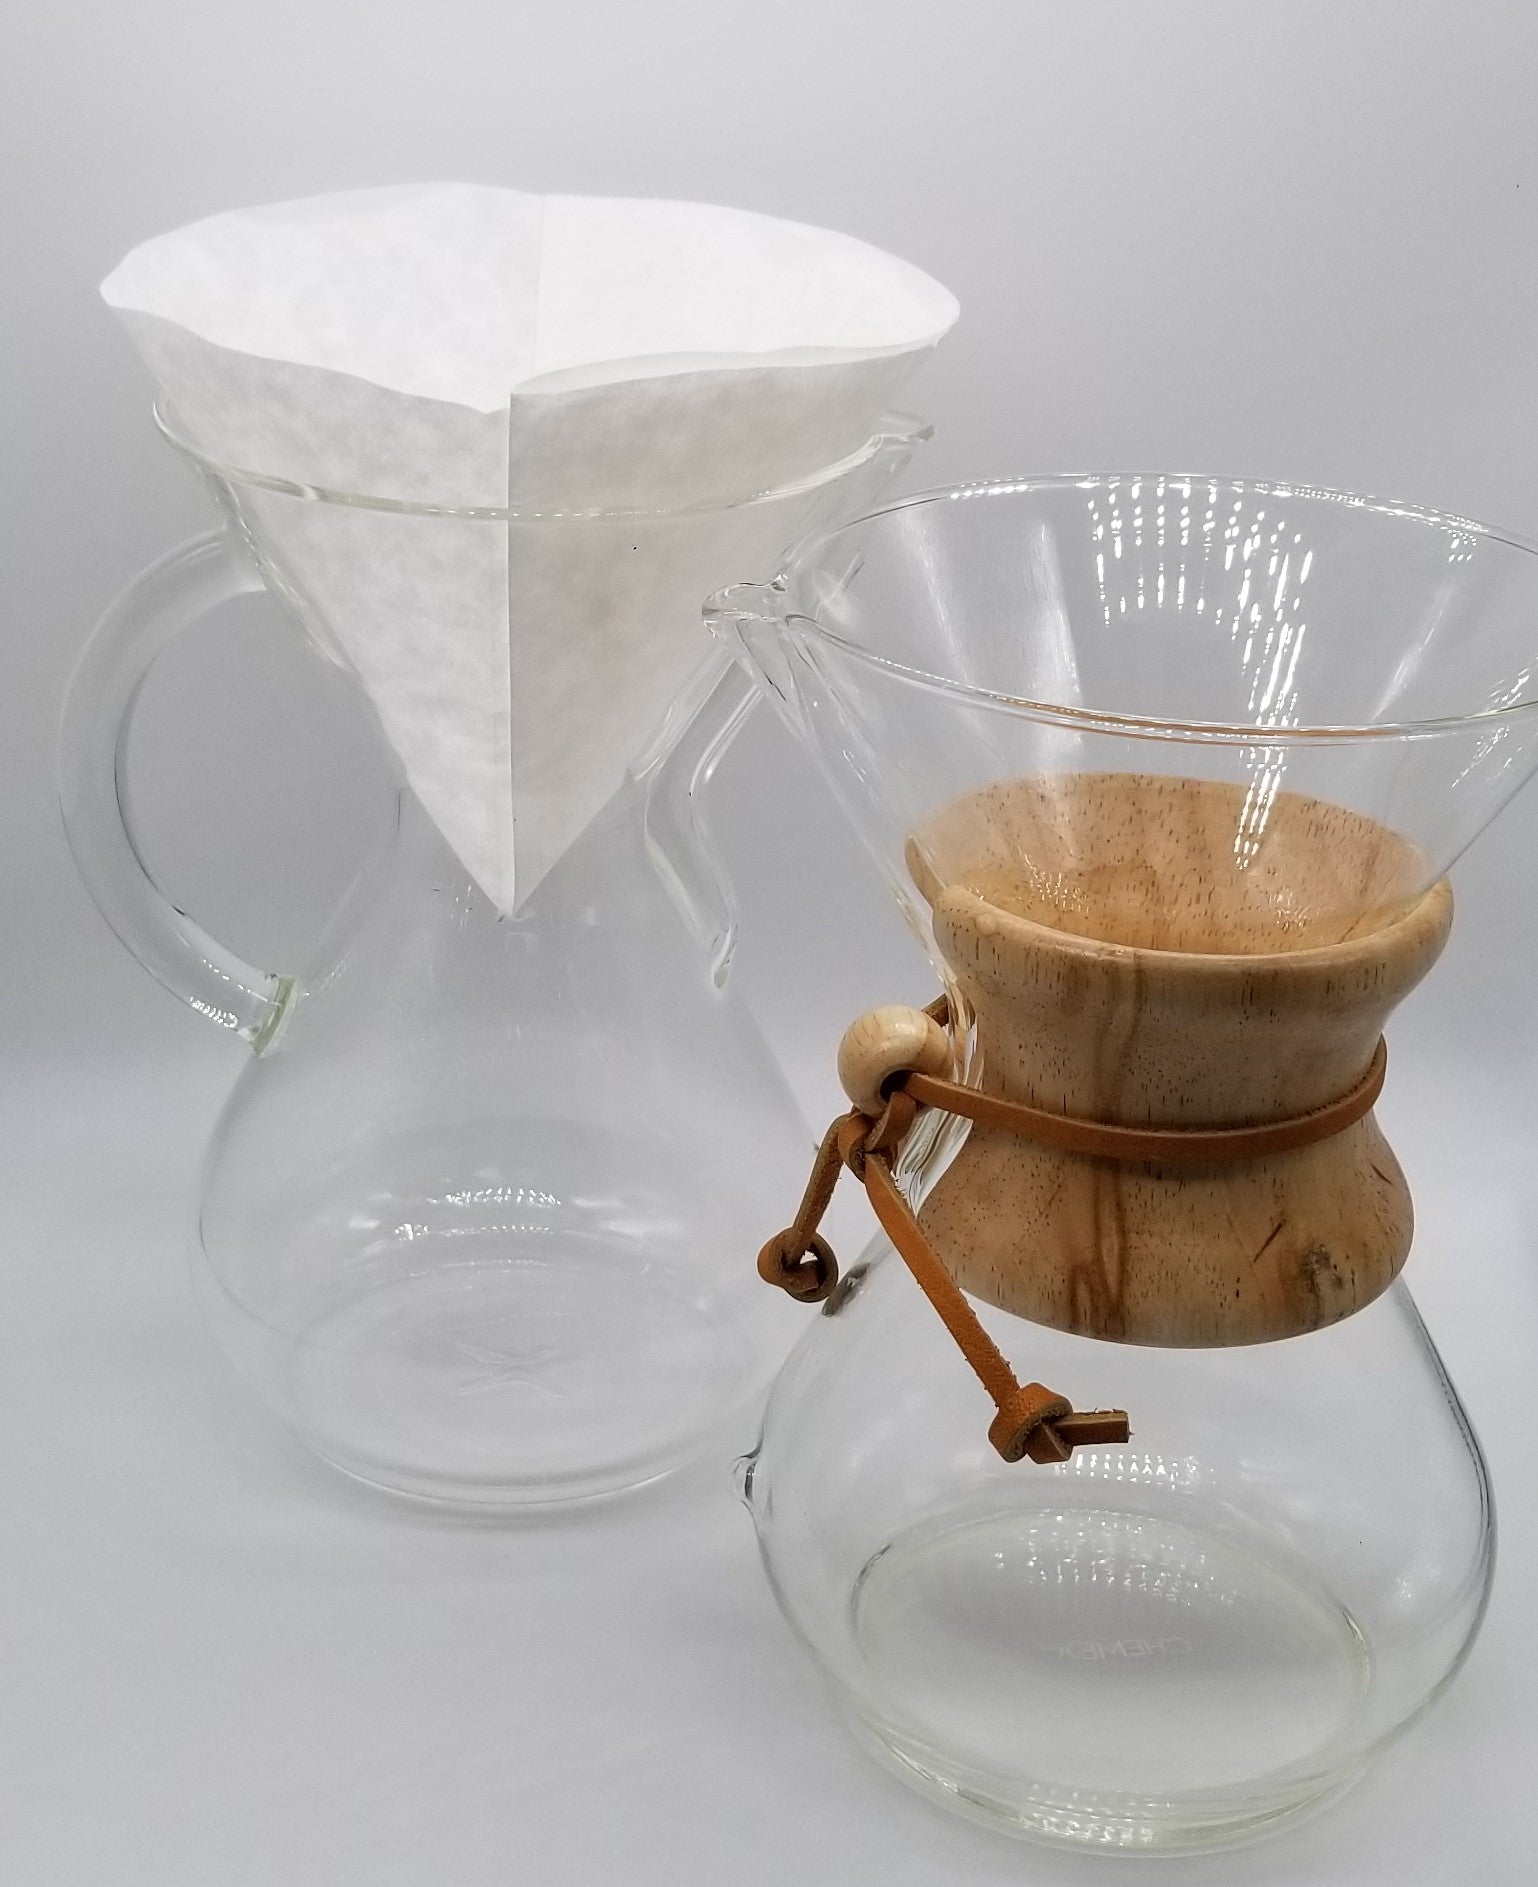 What's up with Chemex Brewing?